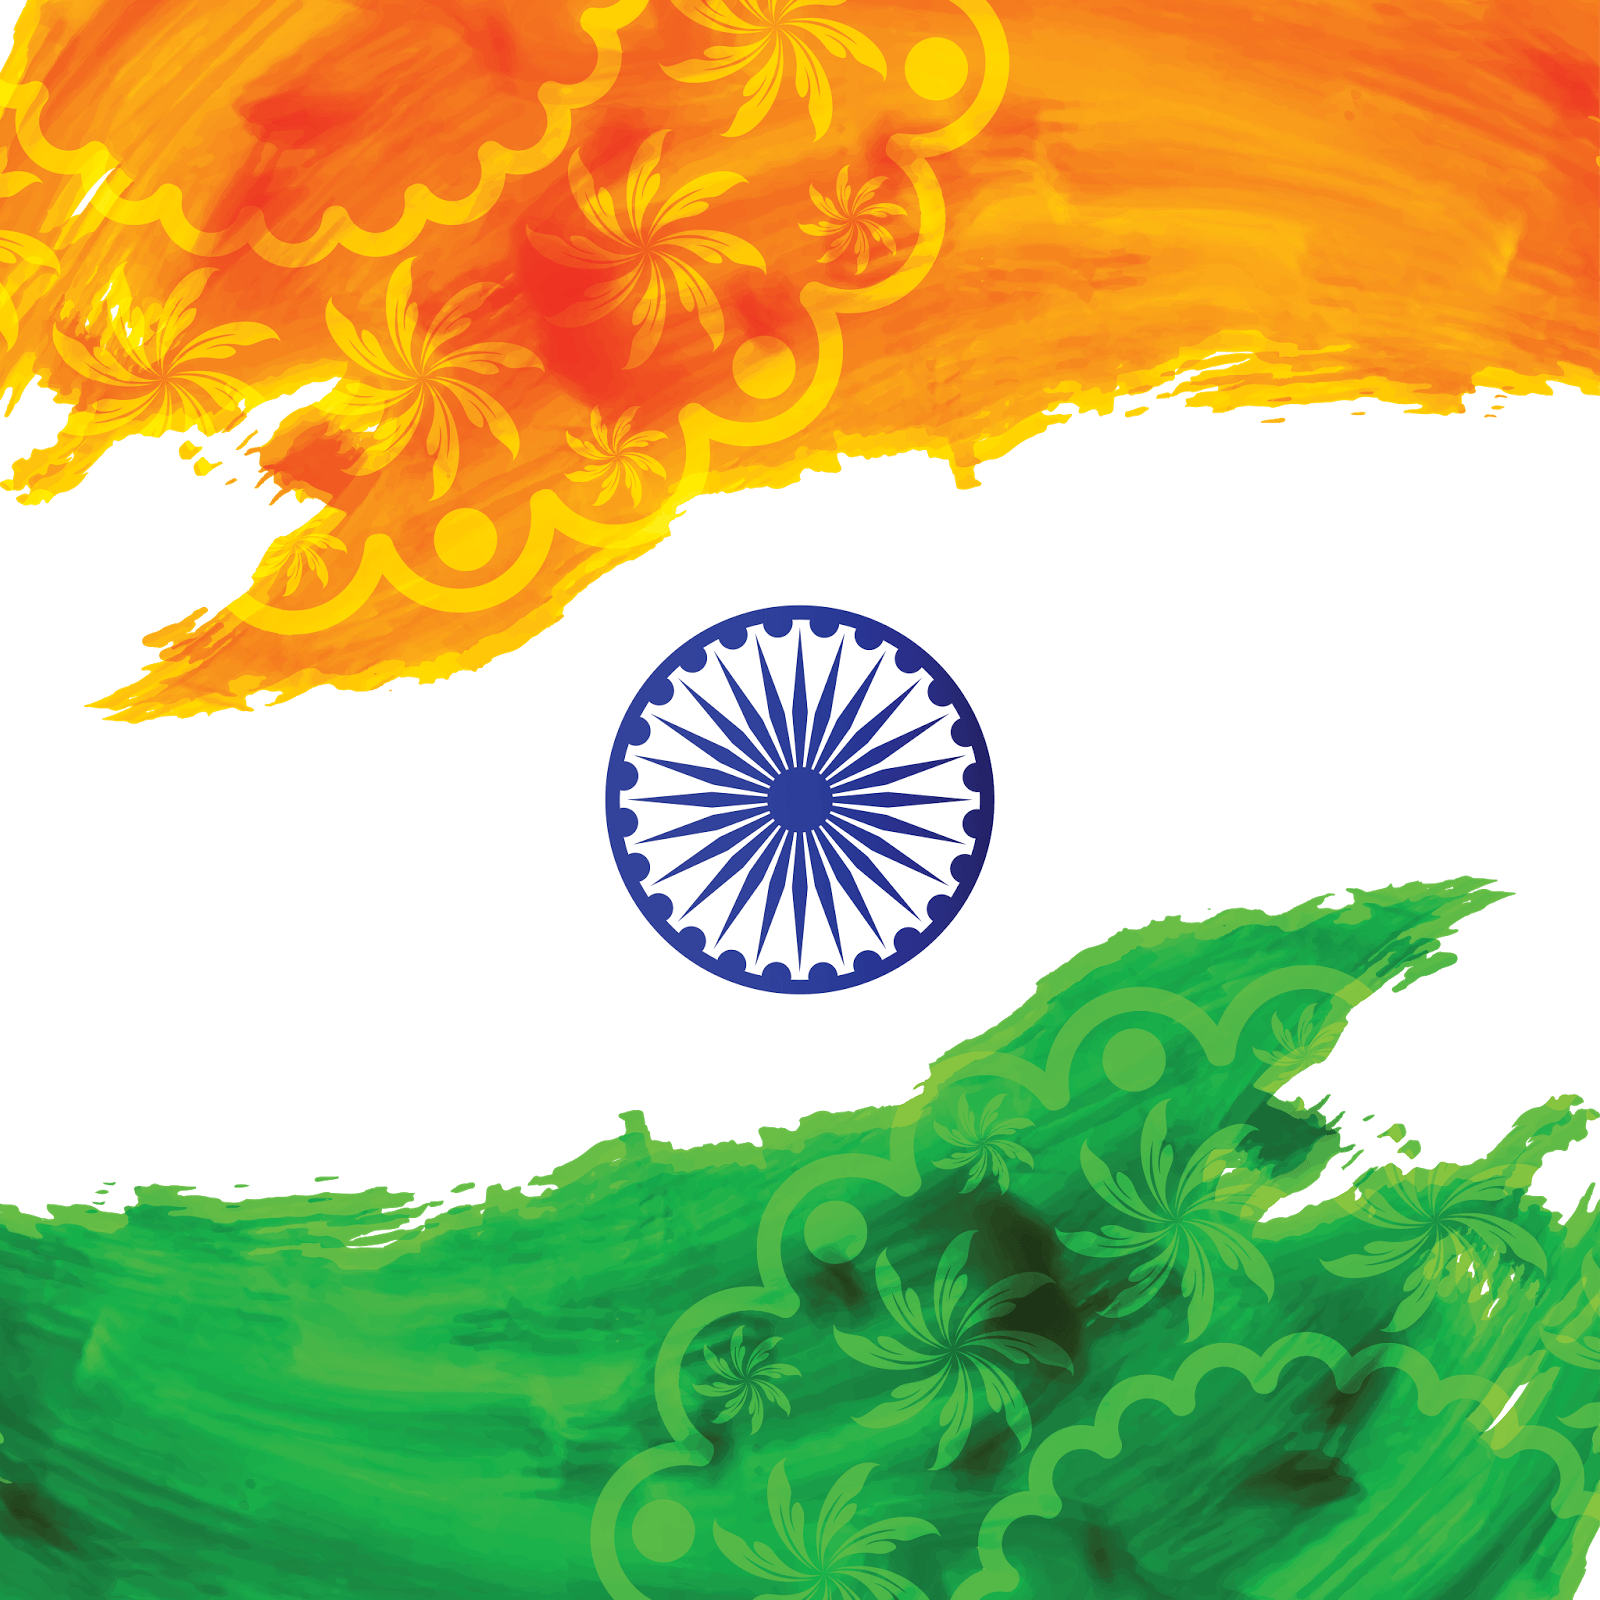 Free indian flag Vector Images | FreeImages